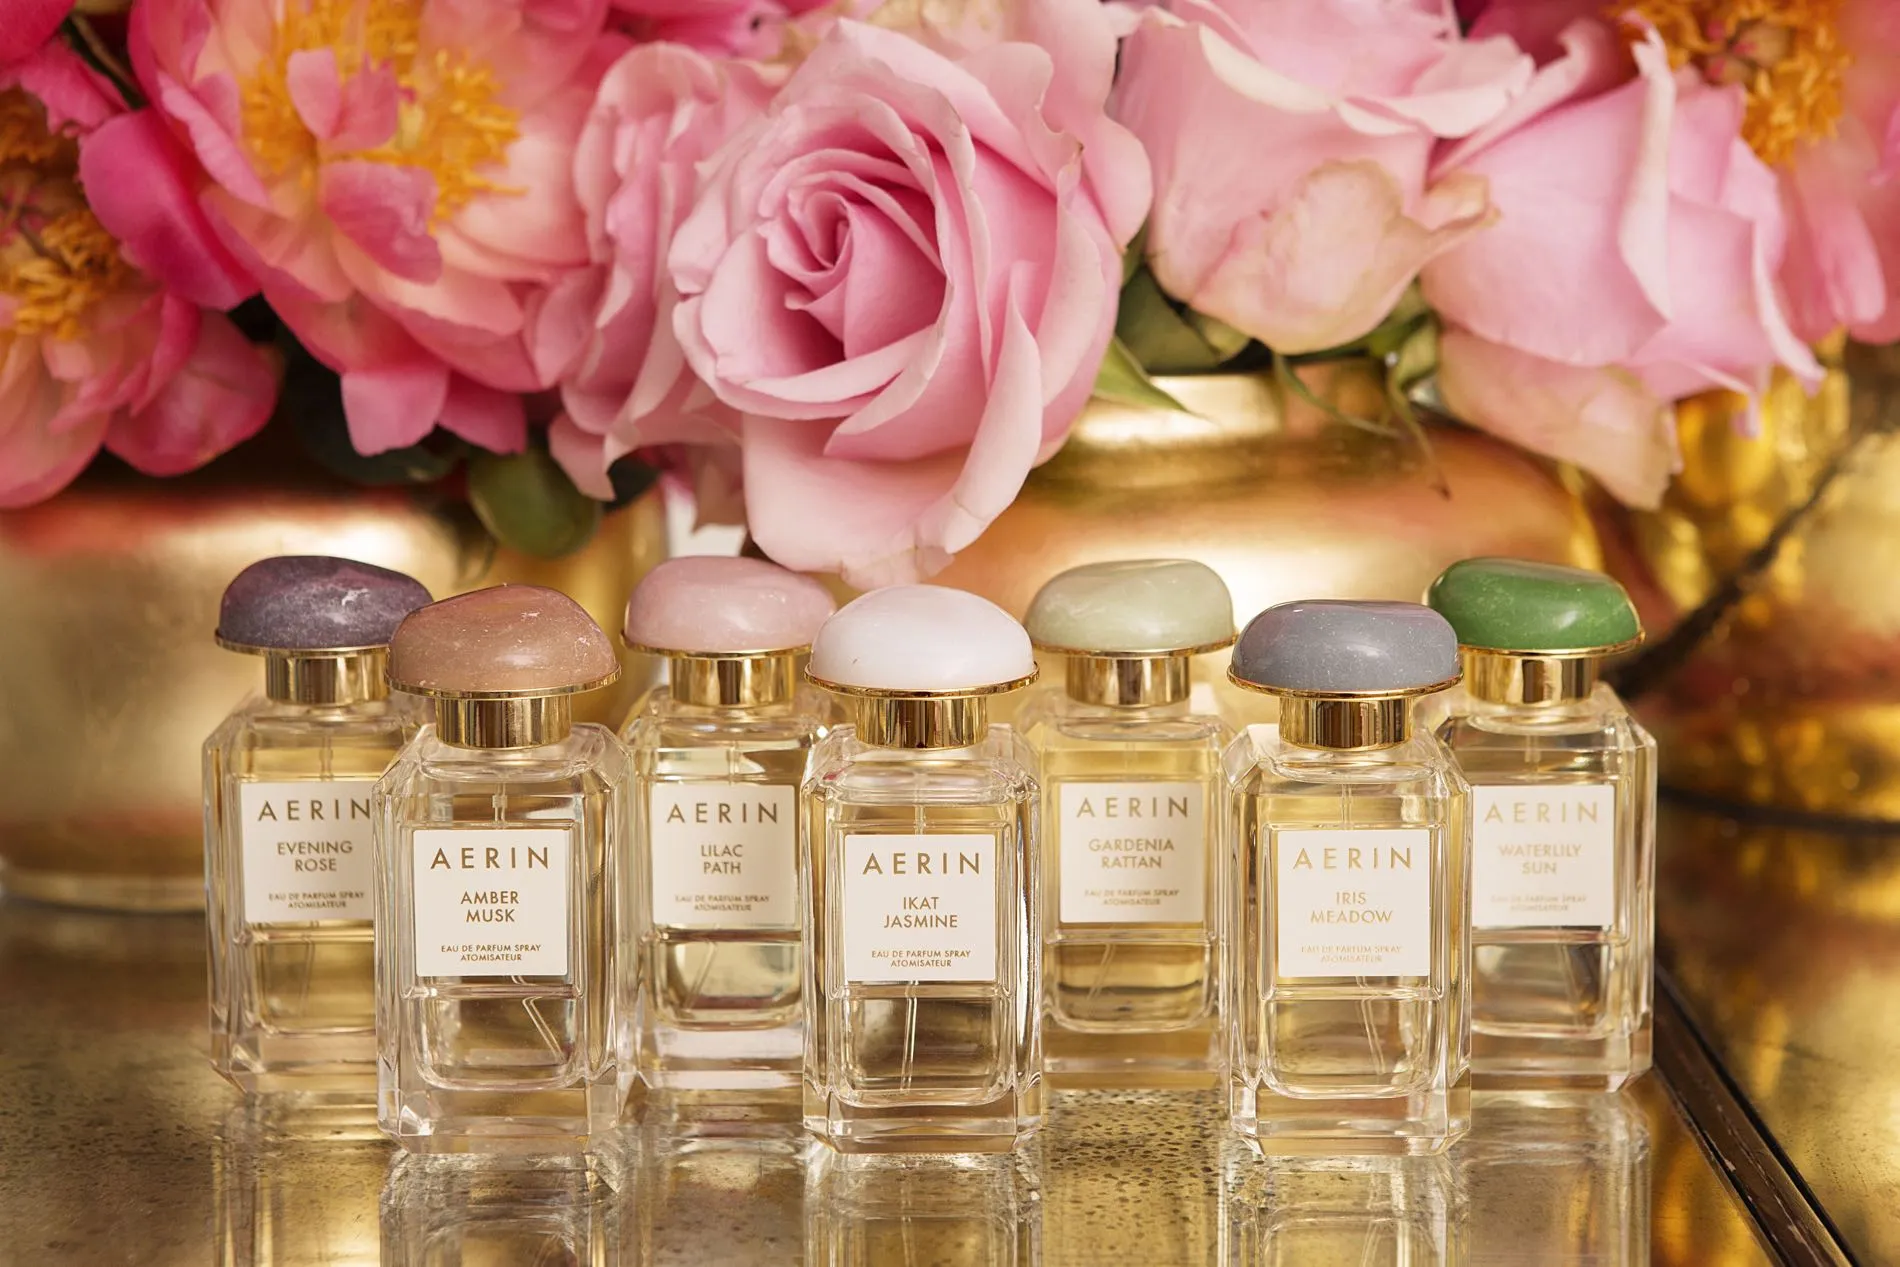 A beautifully arranged bouquet of vibrant flowers accompanied by elegant perfume bottles